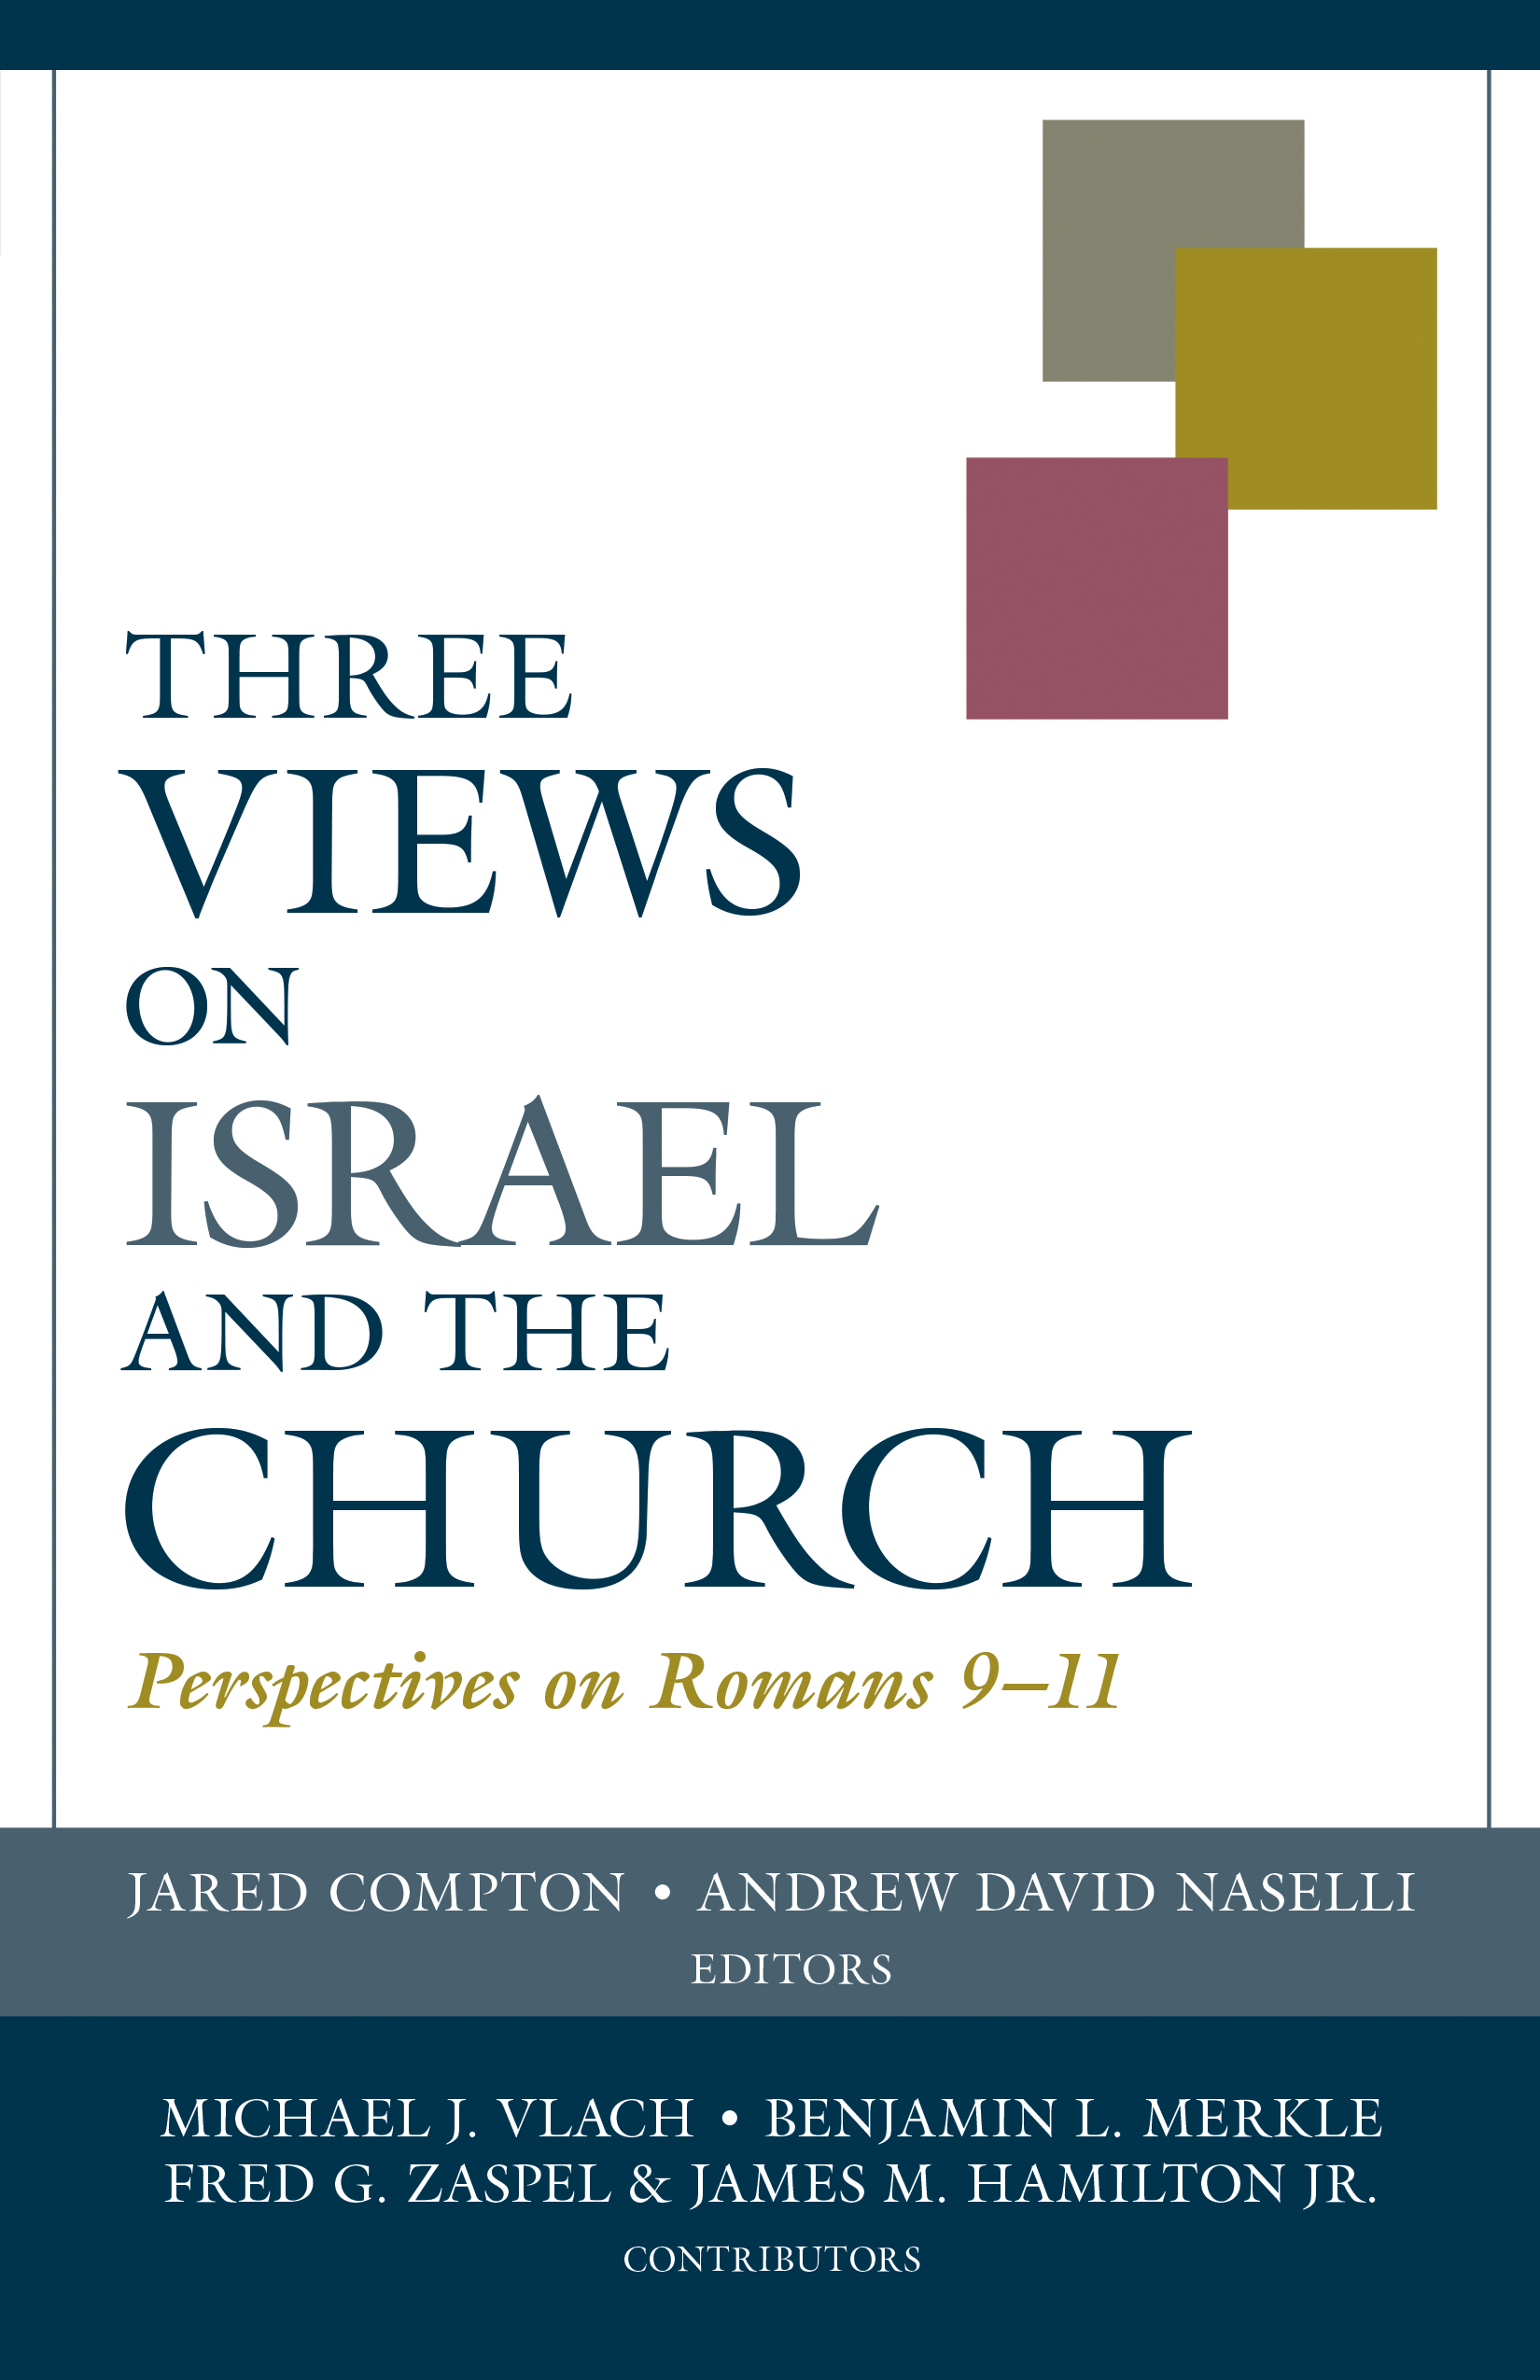 Three Views on Israel and the Church